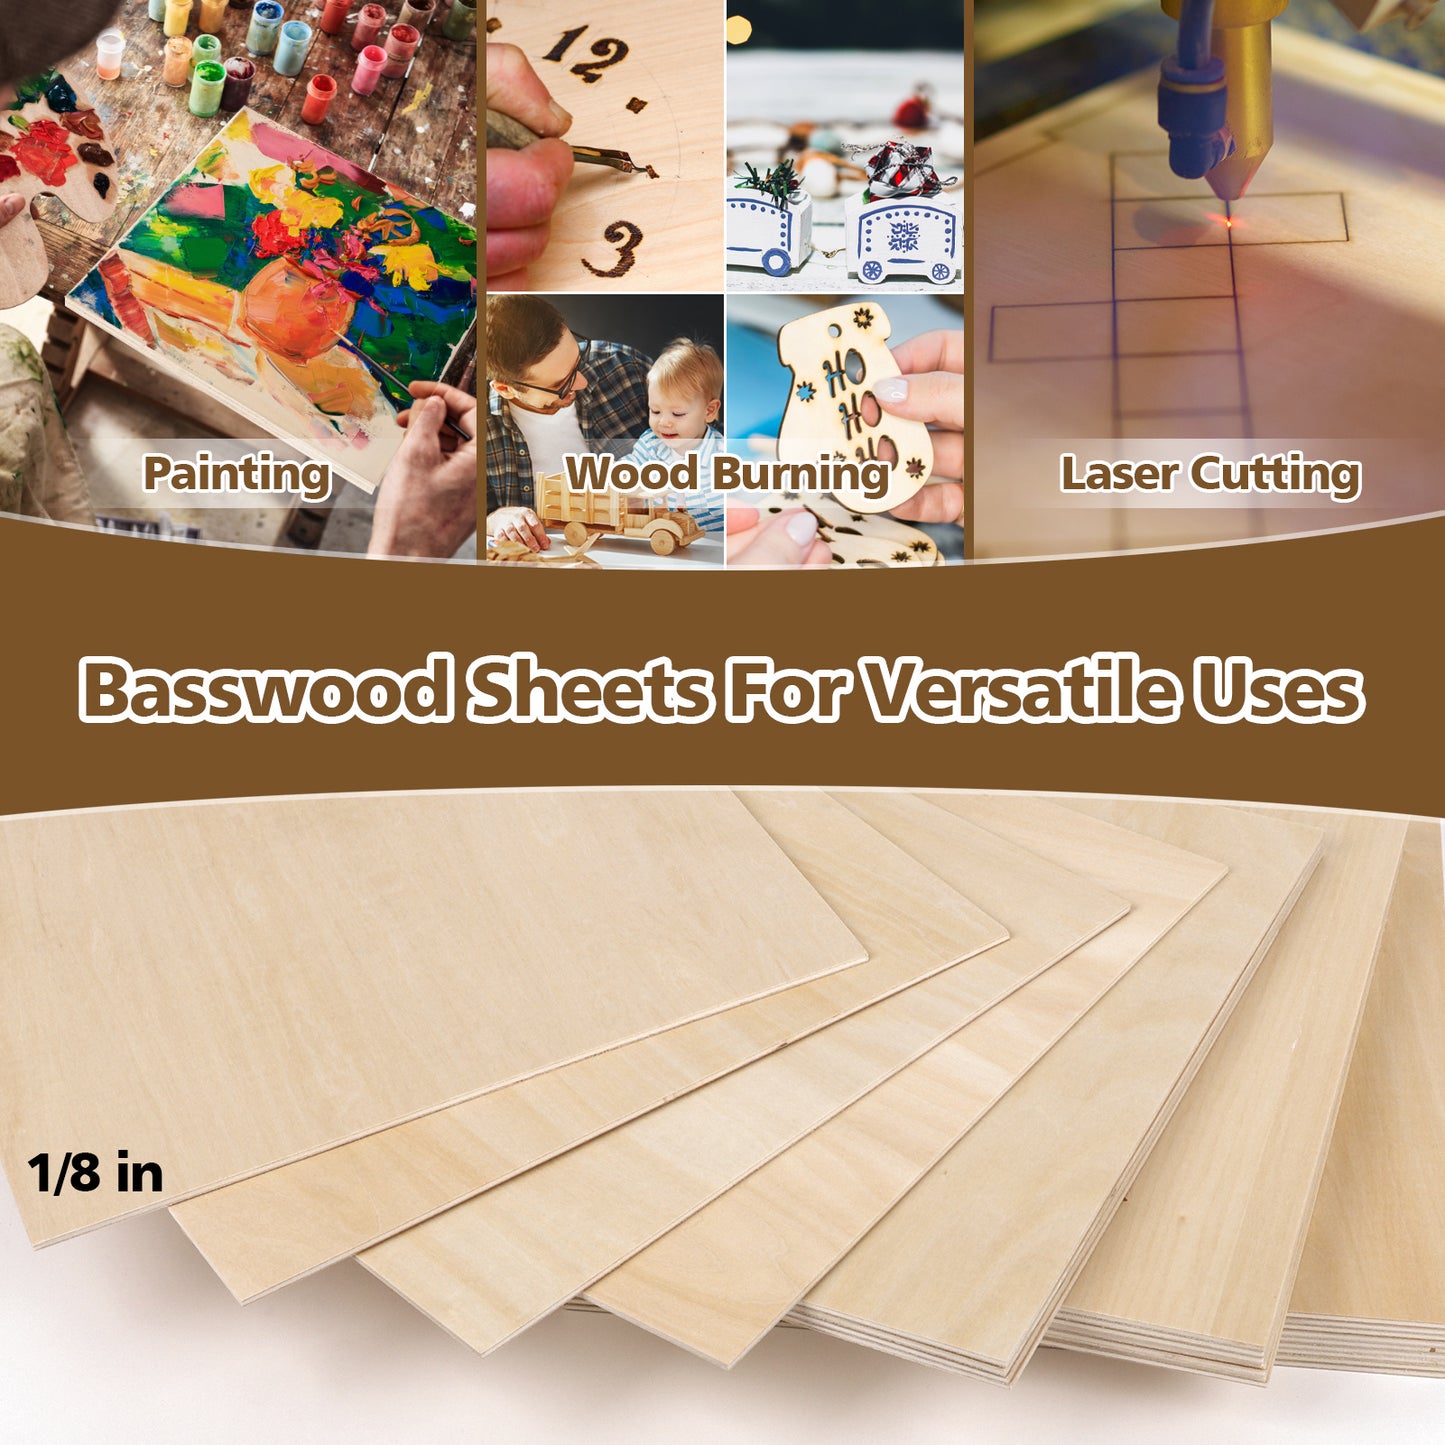 Basswood Sheets 1/8 x 12 x 12 inch - 3mm Basswood Sheets Plywood Sheets Balsa Wood, 24Pcs Square Unfinished Wood Board for DIY Crafts, Laser Cutting, Wood Burning, Painting, Model Carving